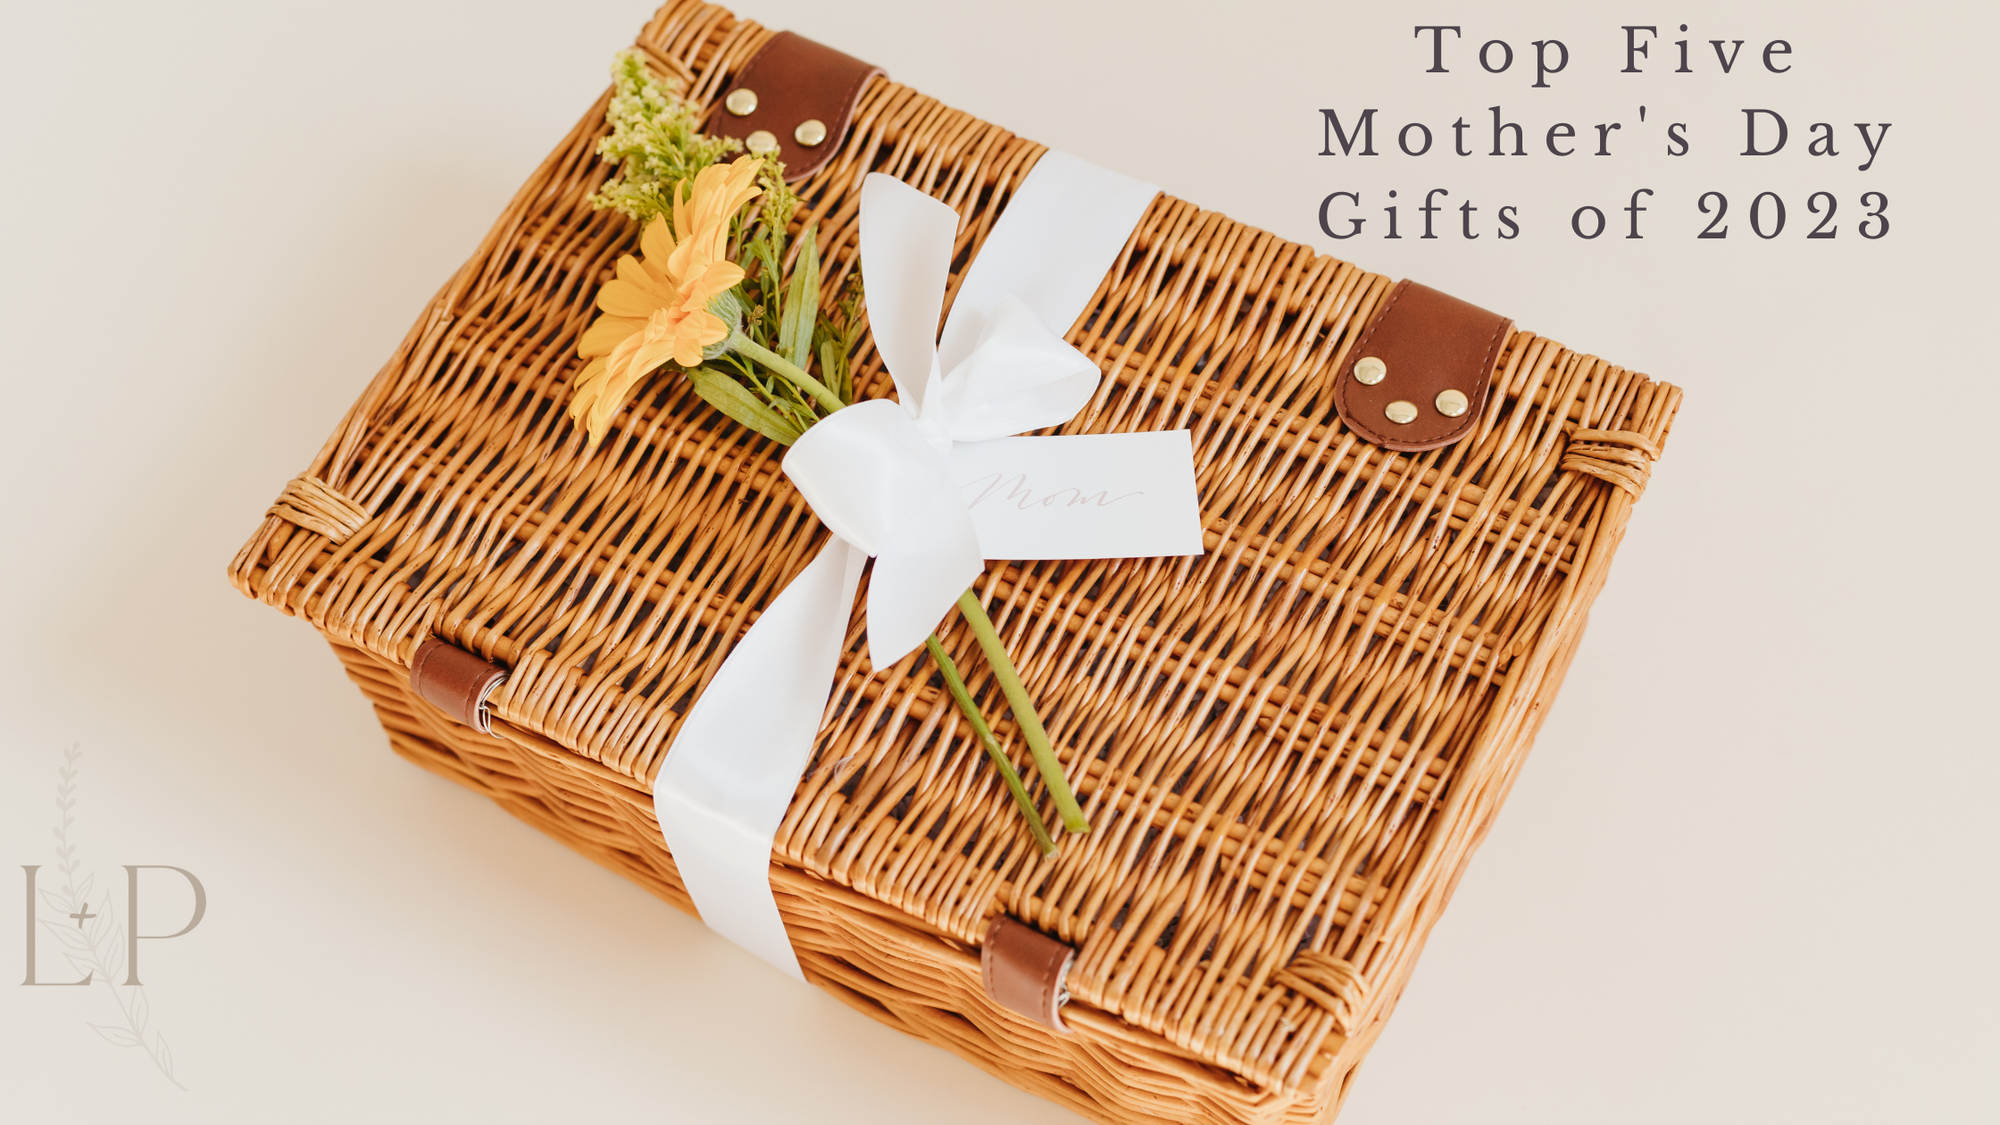 Gifts That Keep on Giving: Our Top 5 Mother's Day Gift Boxes